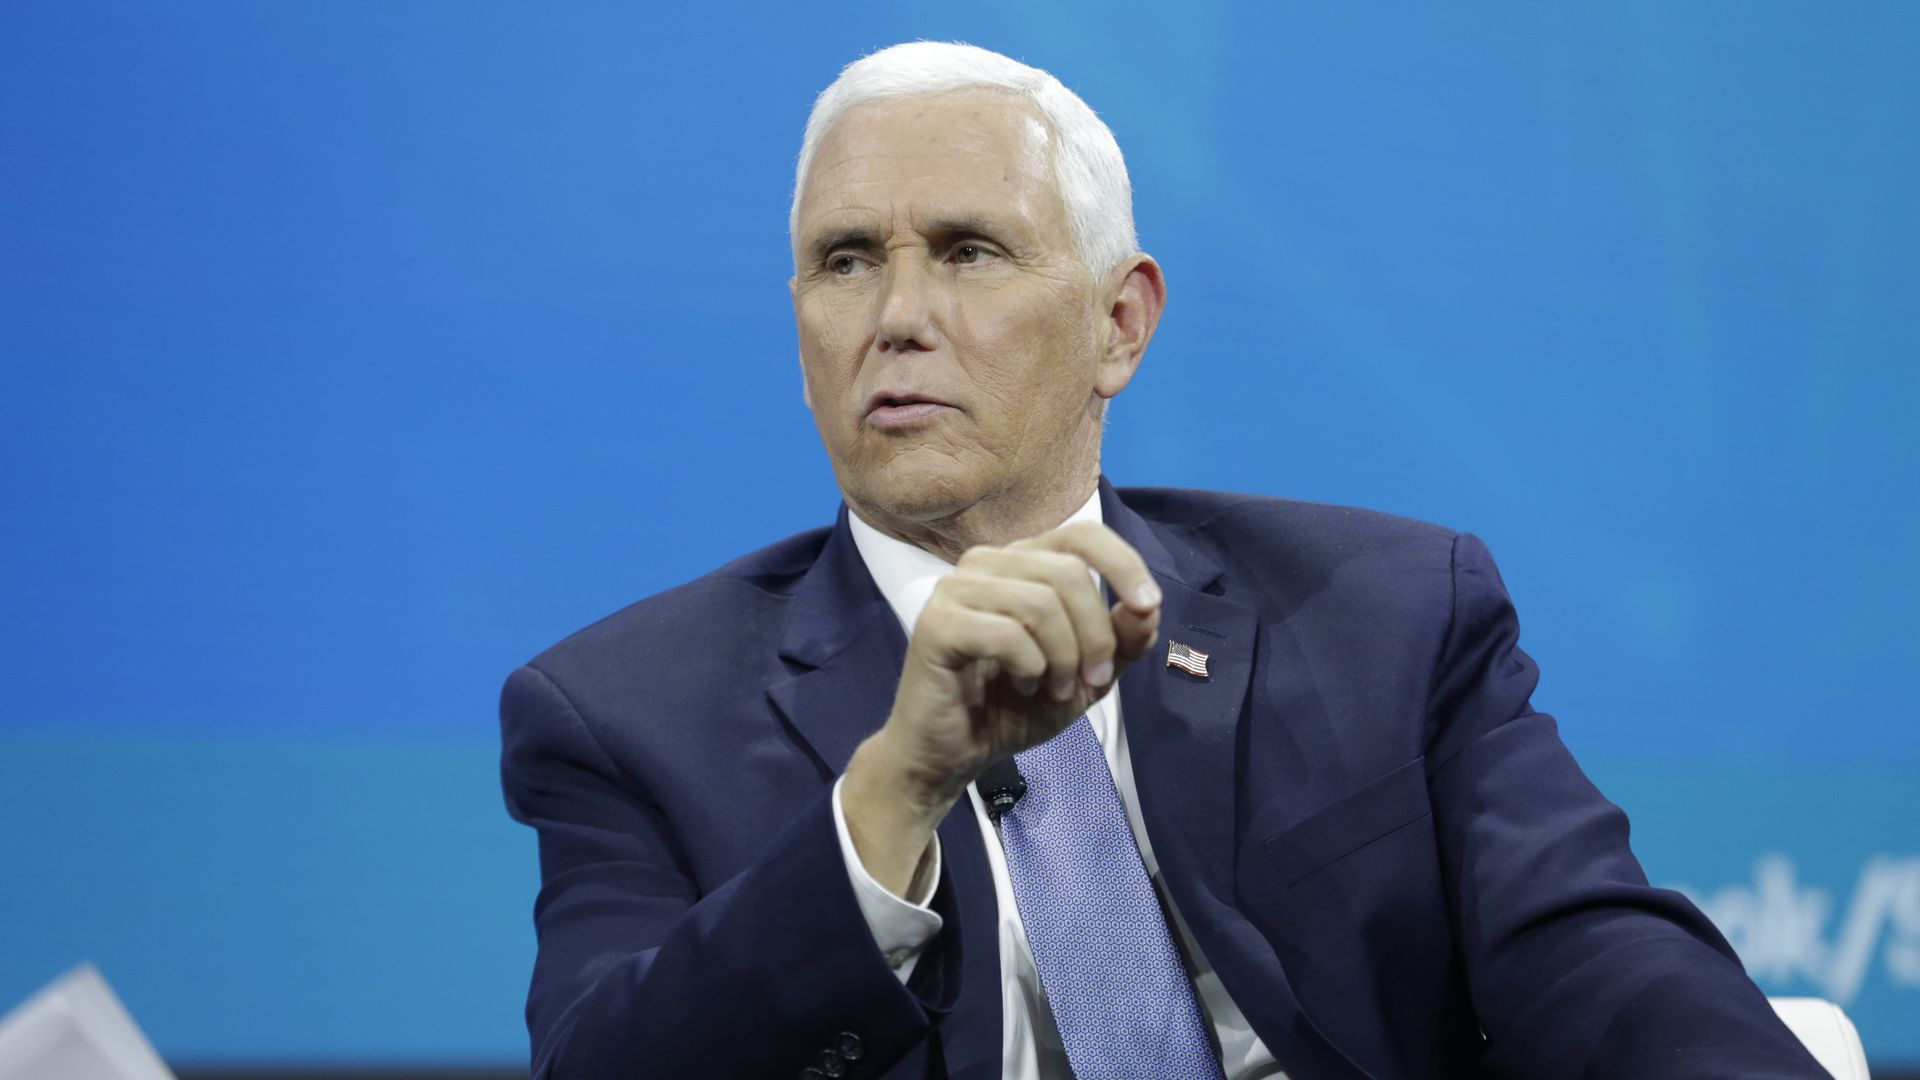  Mike Pence on stage at the 2022 New York Times DealBook on November 30, 2022 in New York City